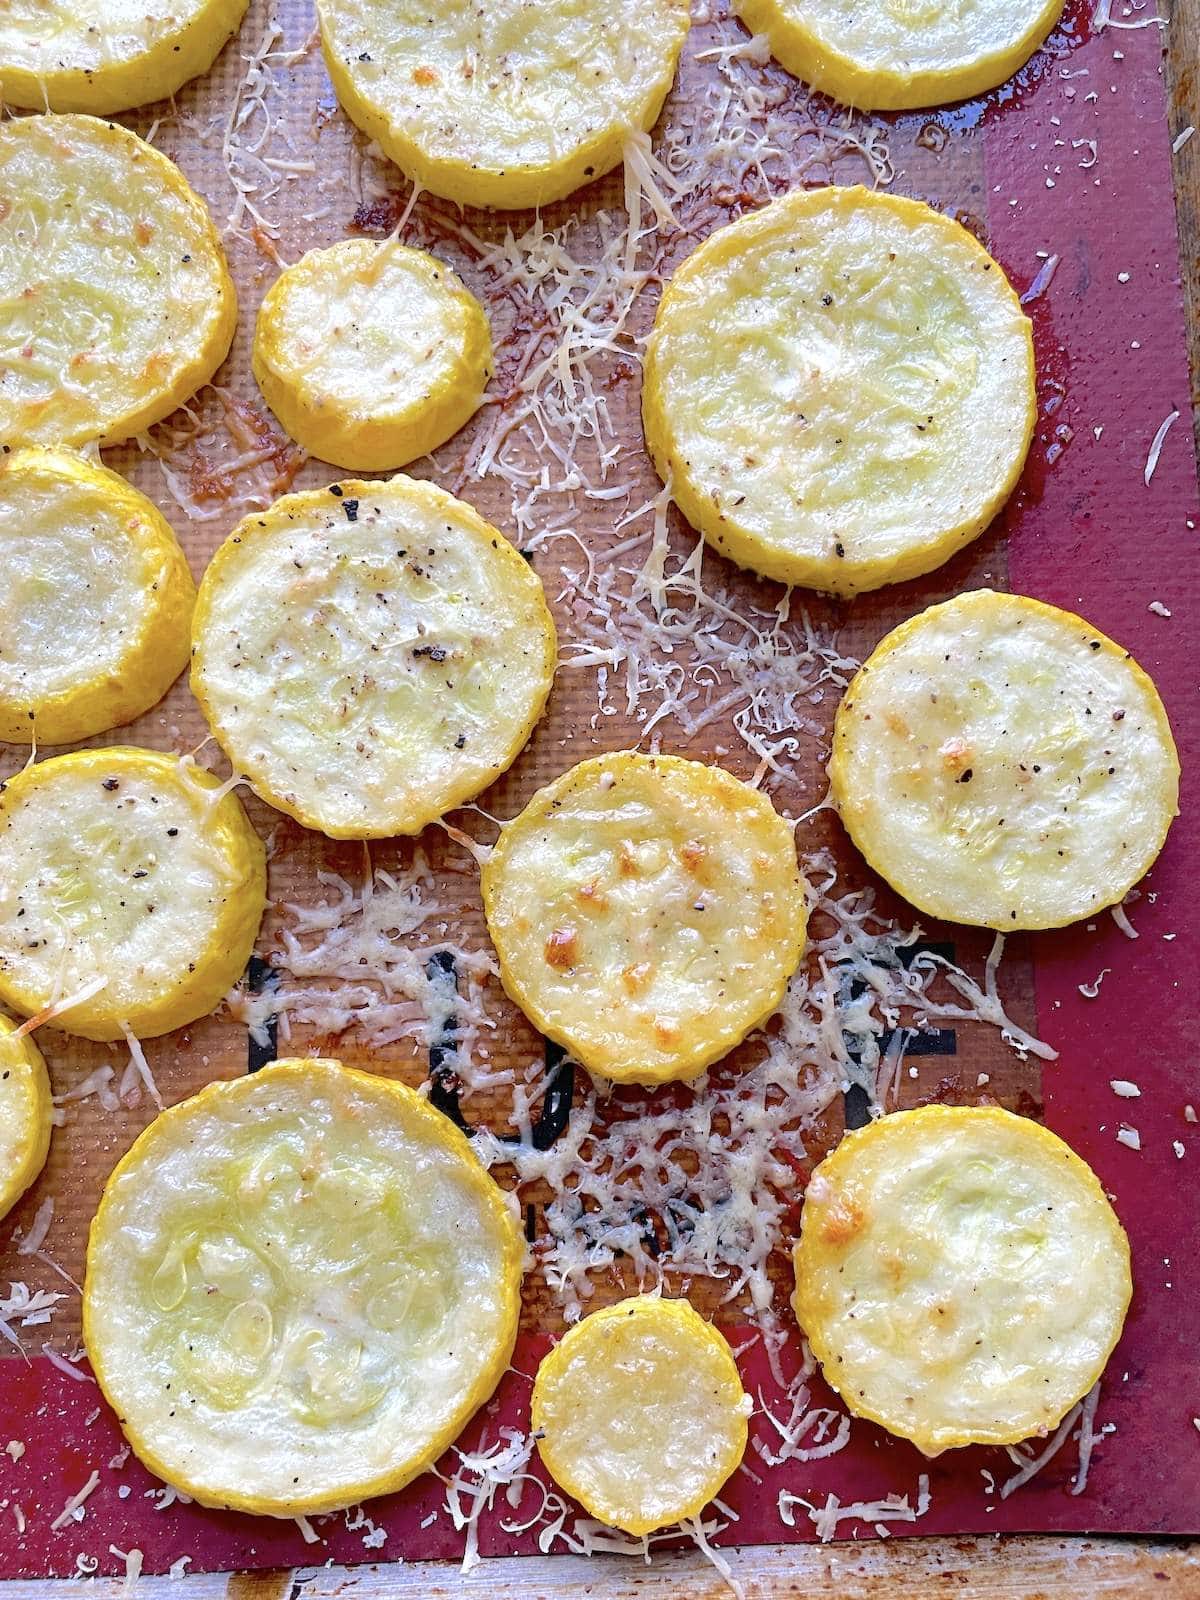 Roasted sliced squash rounds on a baking sheet topped with parmesan cheese.